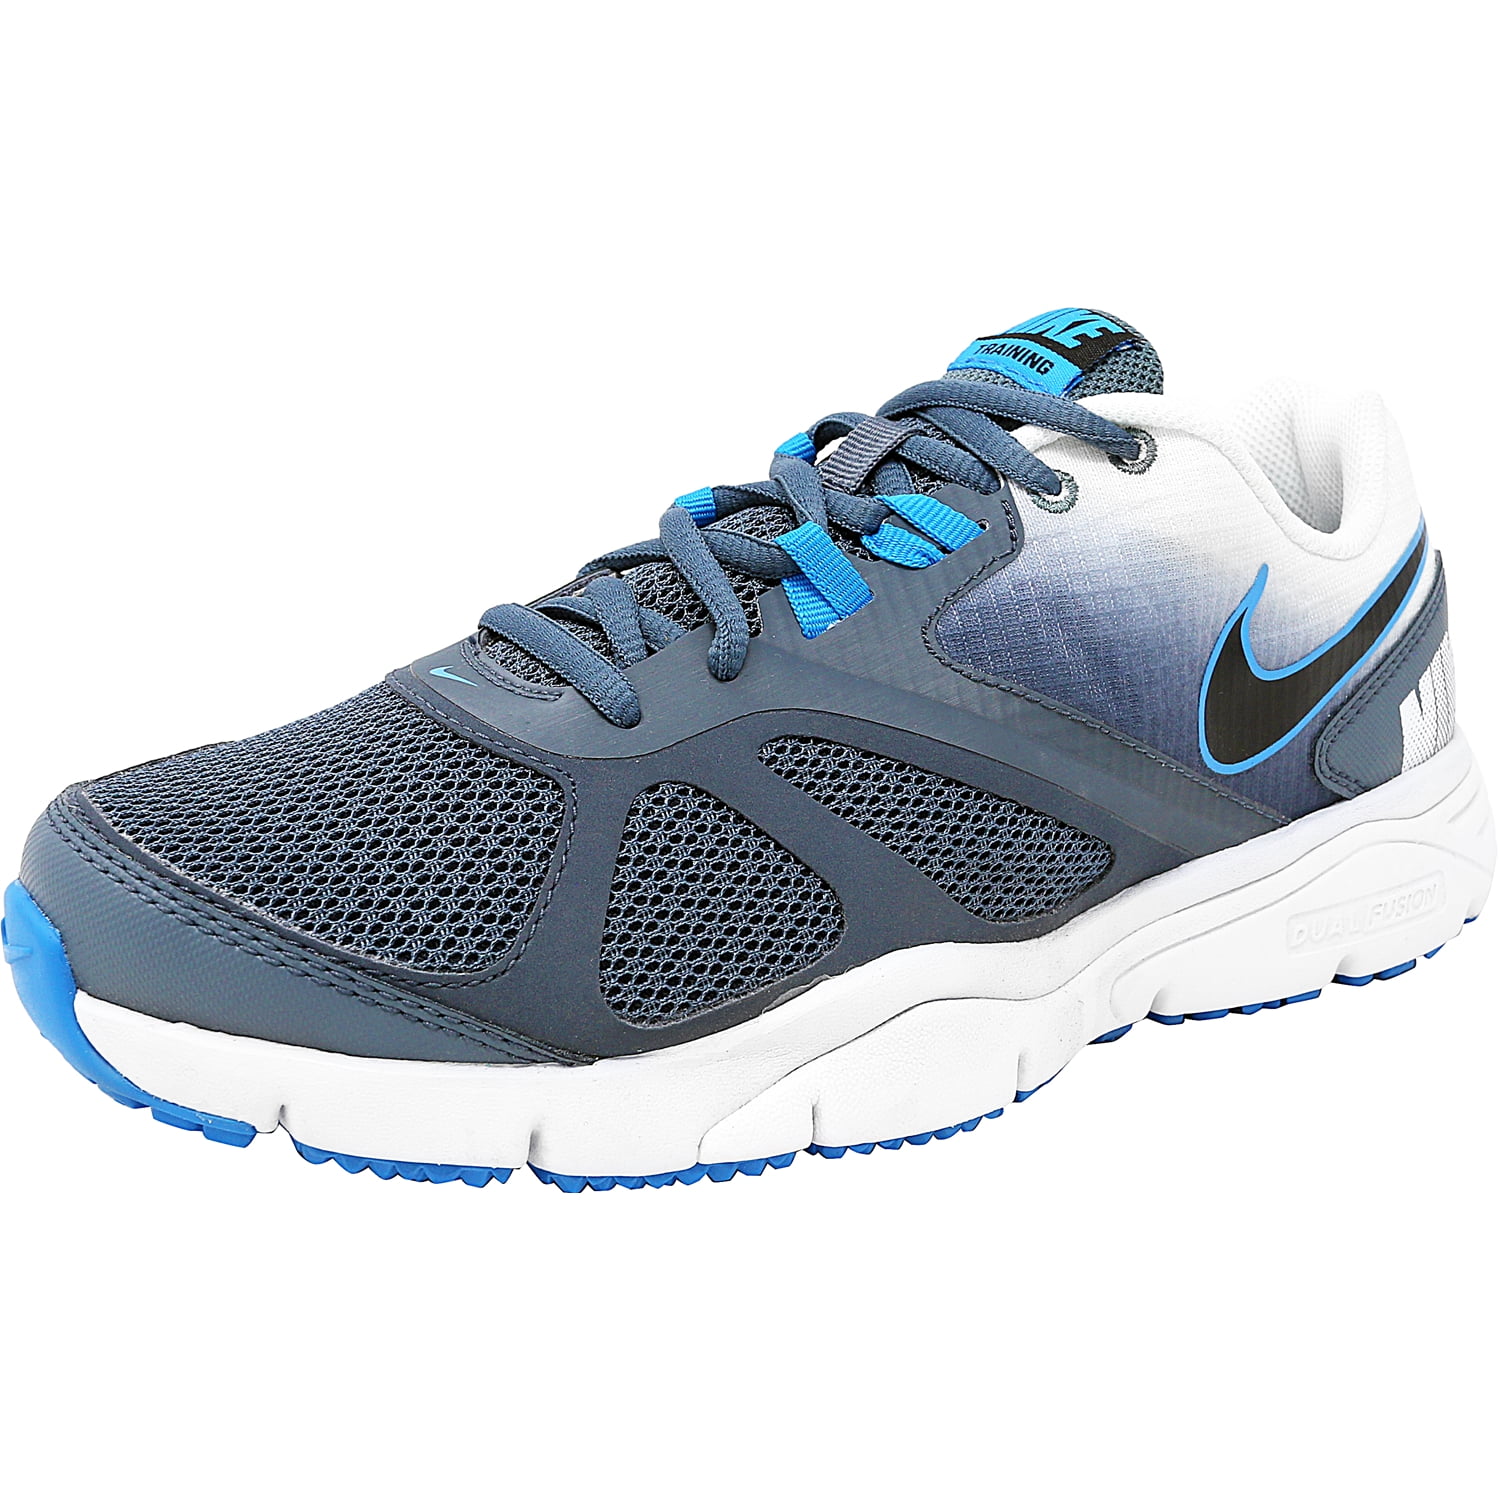 Nike Men's 554889 402 Ankle-High Training Shoes - 6.5M | Walmart Canada